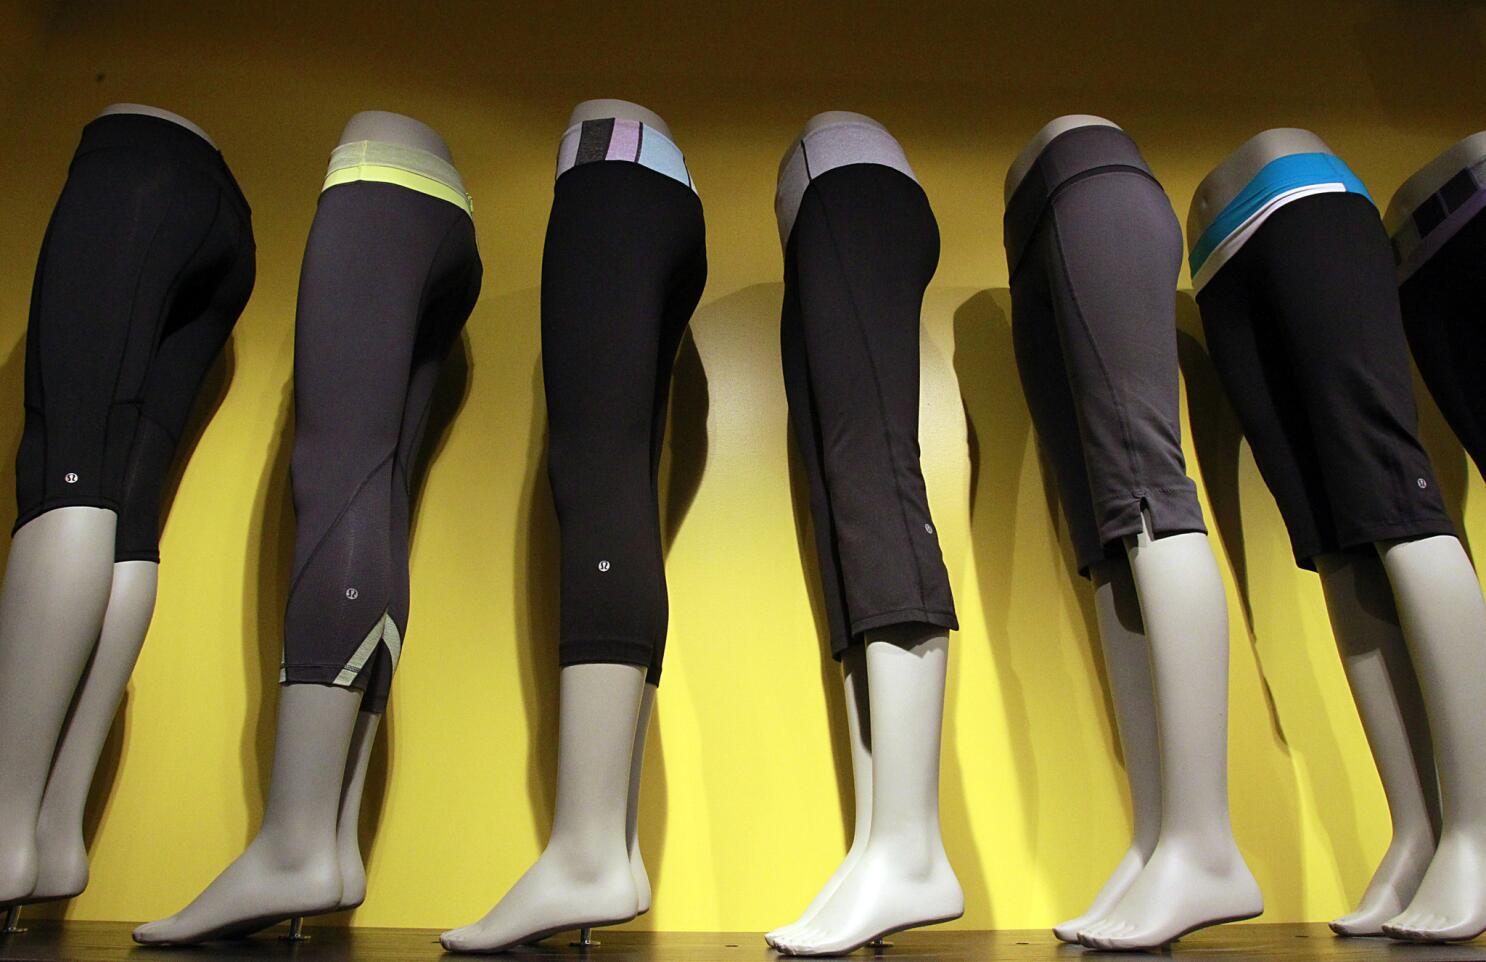 US school bans girls from wearing yoga pants - too distracting for boys